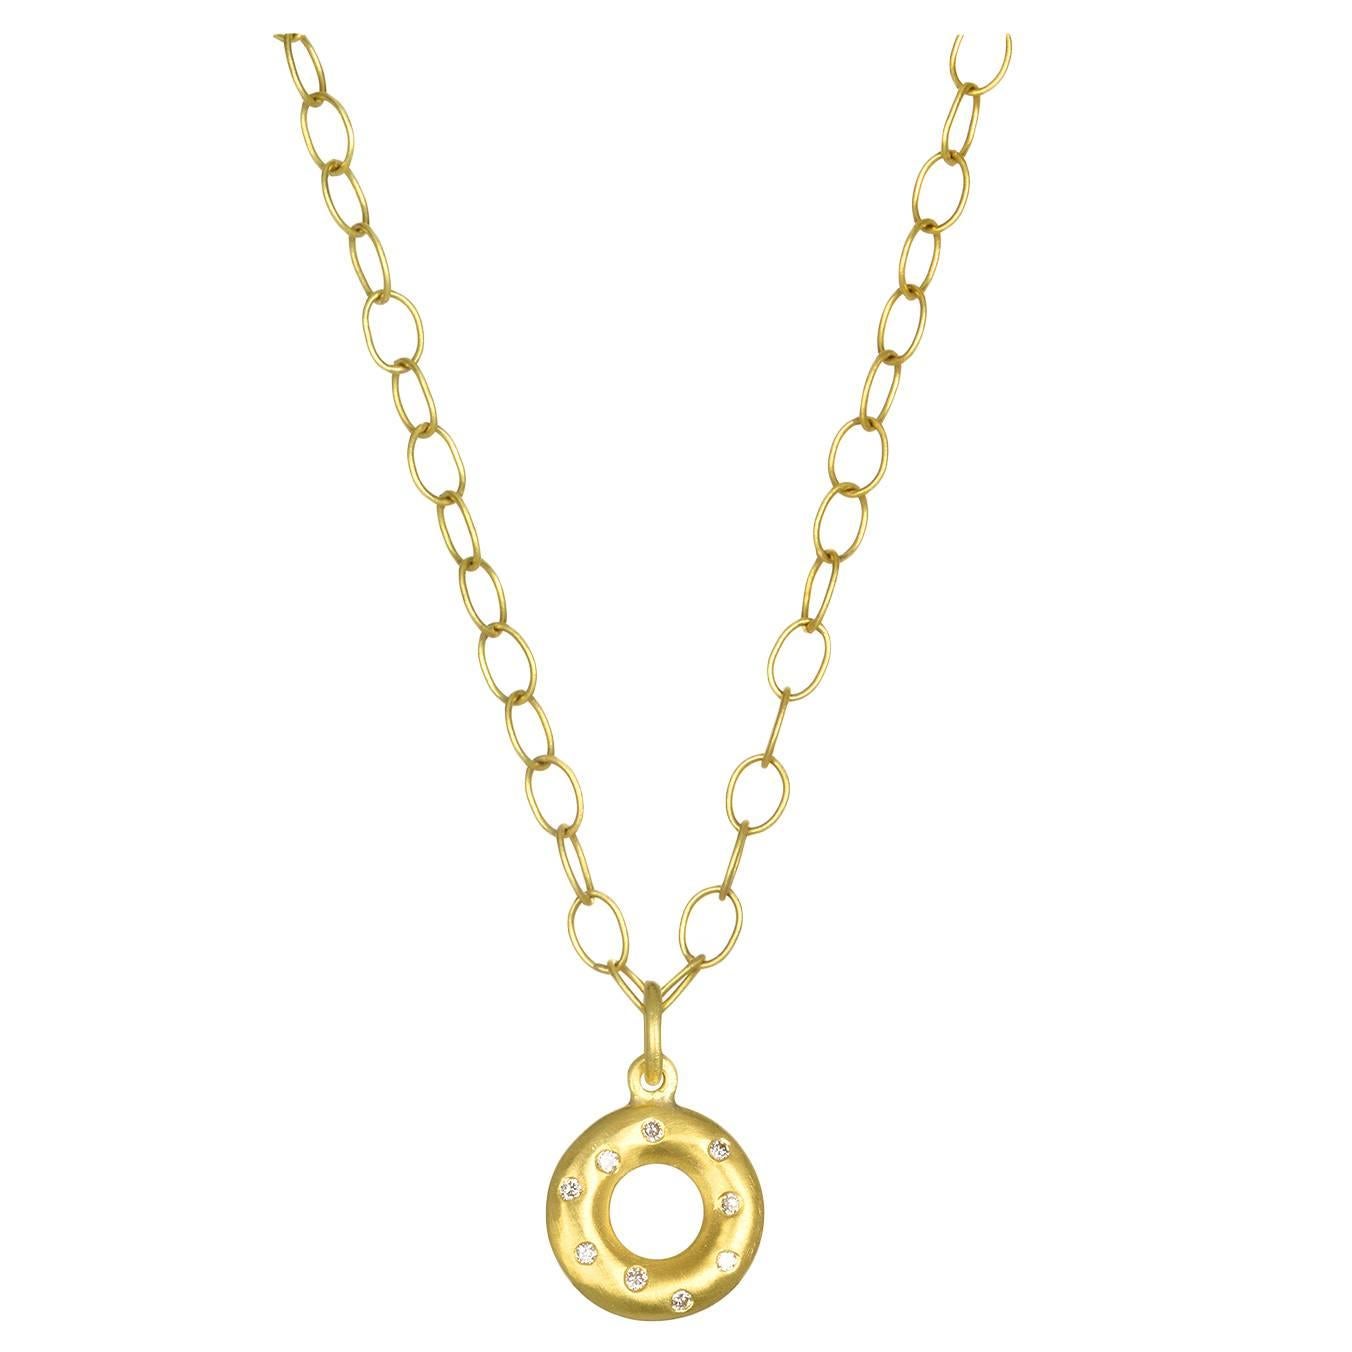 Our favorite Lifesaver flavor is Diamond!
18k Gold Diamond Life Saver Pendant. Total diamond weight is .14 carats. 1/2 inch diameter width. Matte finished.  

Chain Shown.  18K Handmade oval link chain 32